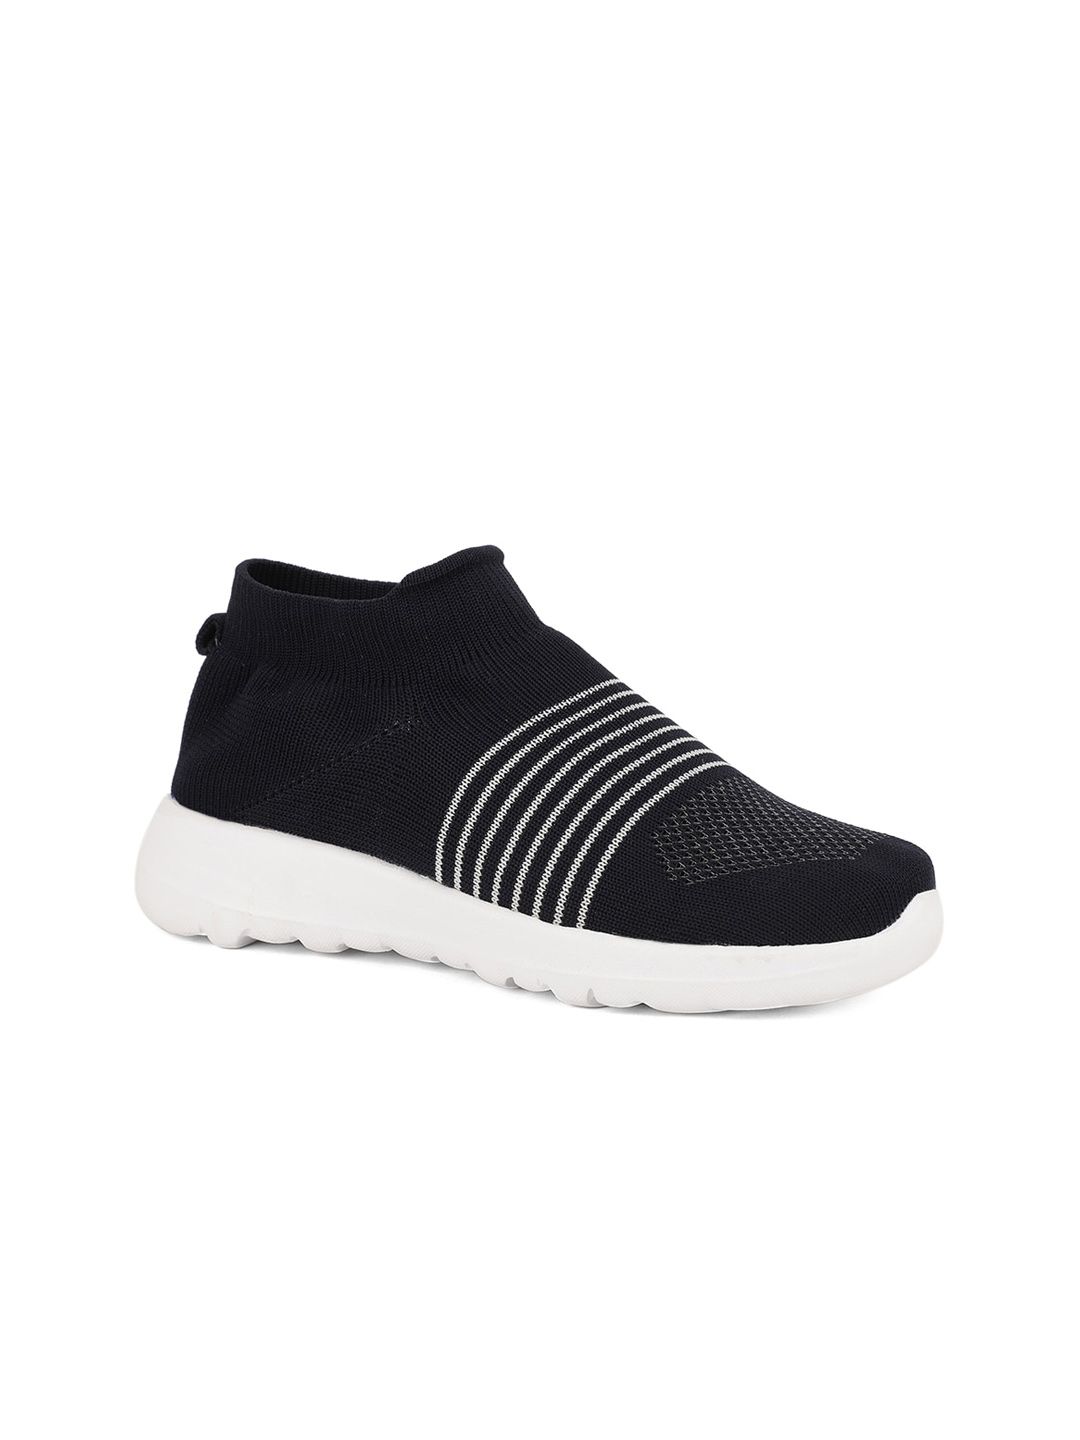 HERE&NOW Women Black Woven Design Slip-On Sneakers Price in India